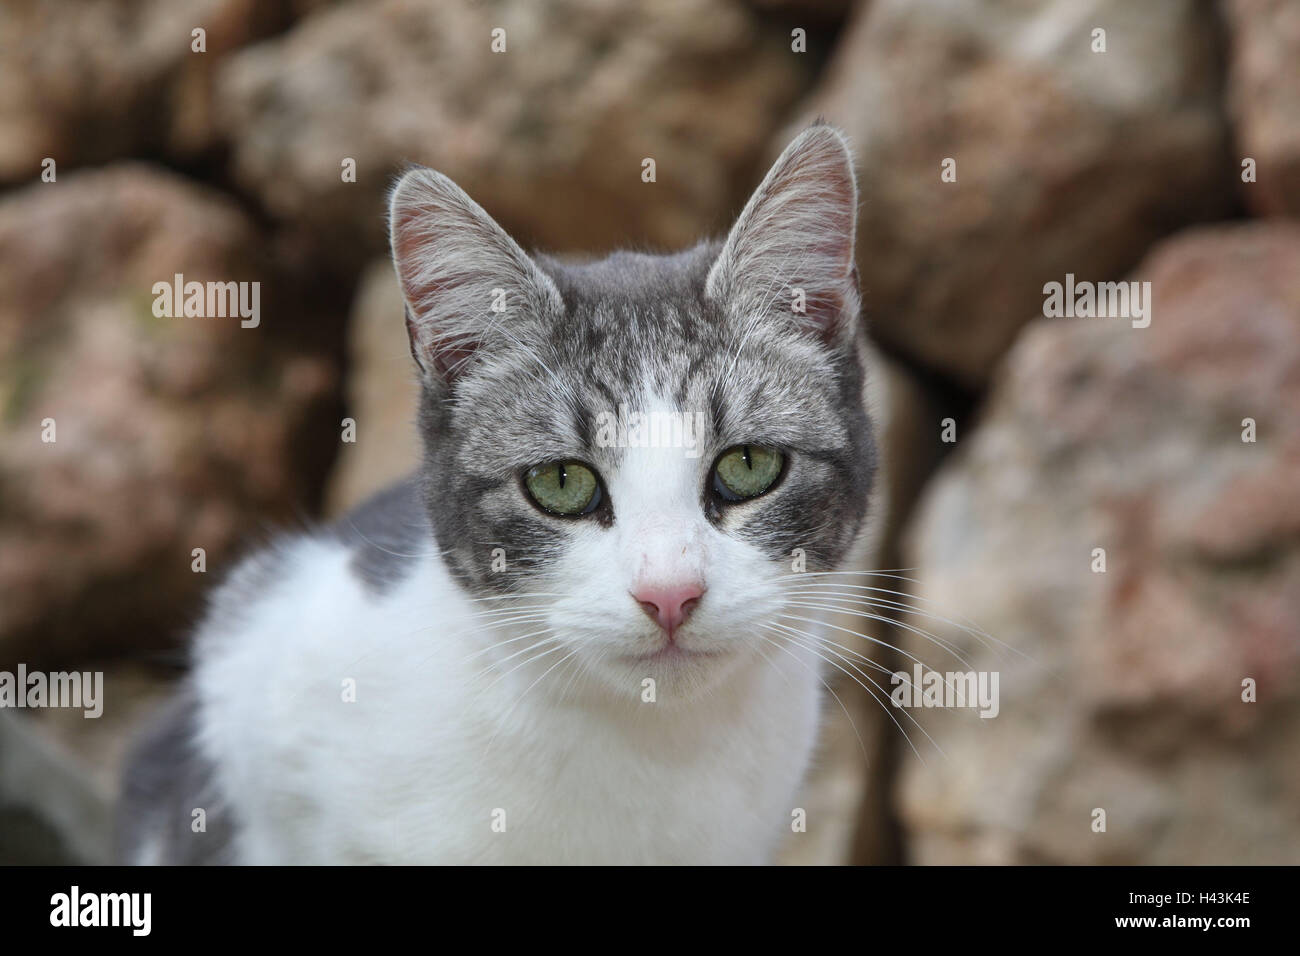 Cat, greyish white, sit, portrait, animals, mammals, pets, small cats, Felidae, domesticates, house cat, without Lord, day release prisoners, stray, street cat, white-striped, animal portrait, cat's portrait, individually, only, outside, Spain, Stock Photo